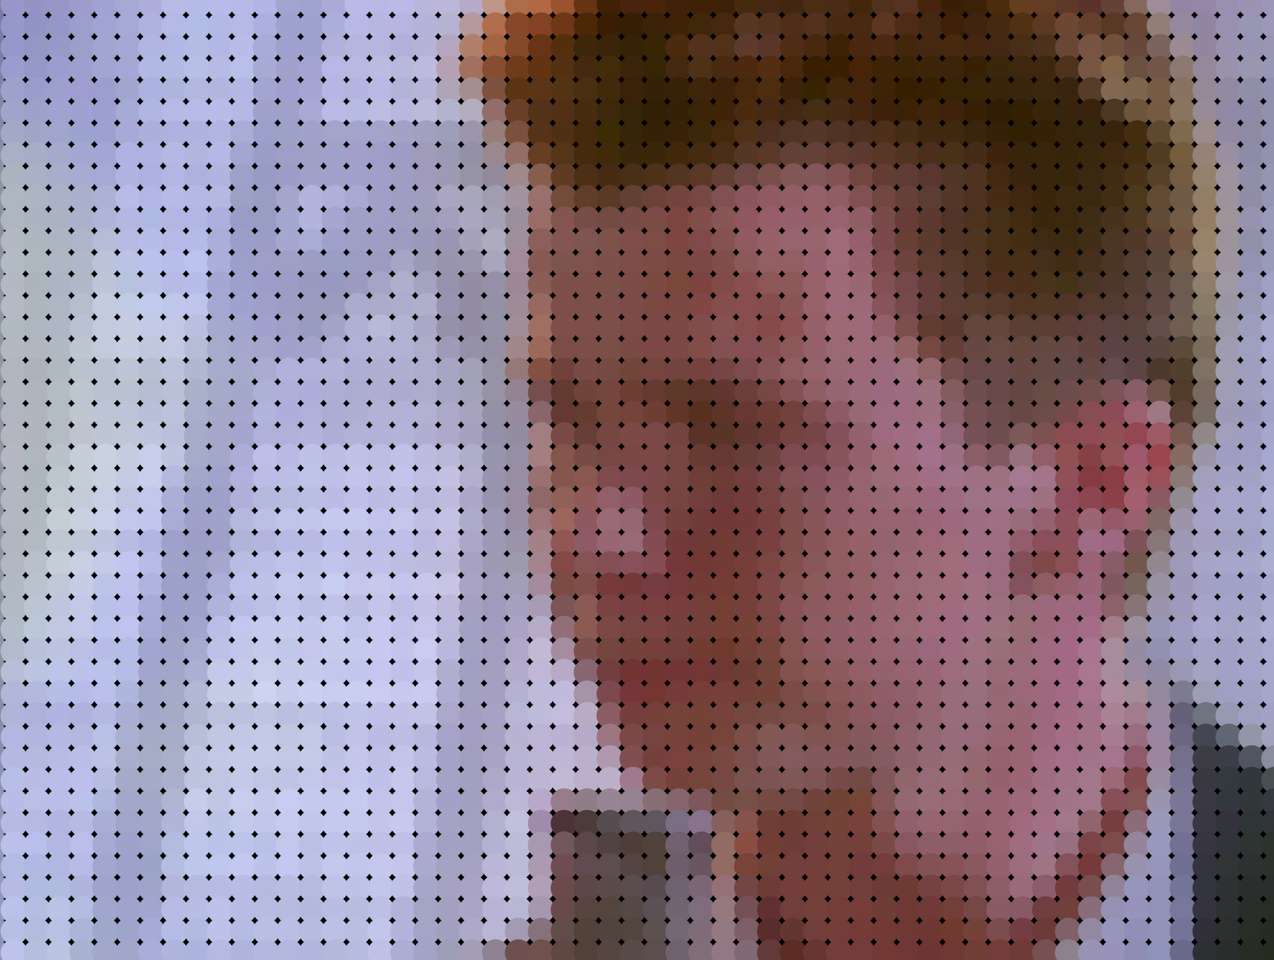 8-bit astley puzzle online from photo